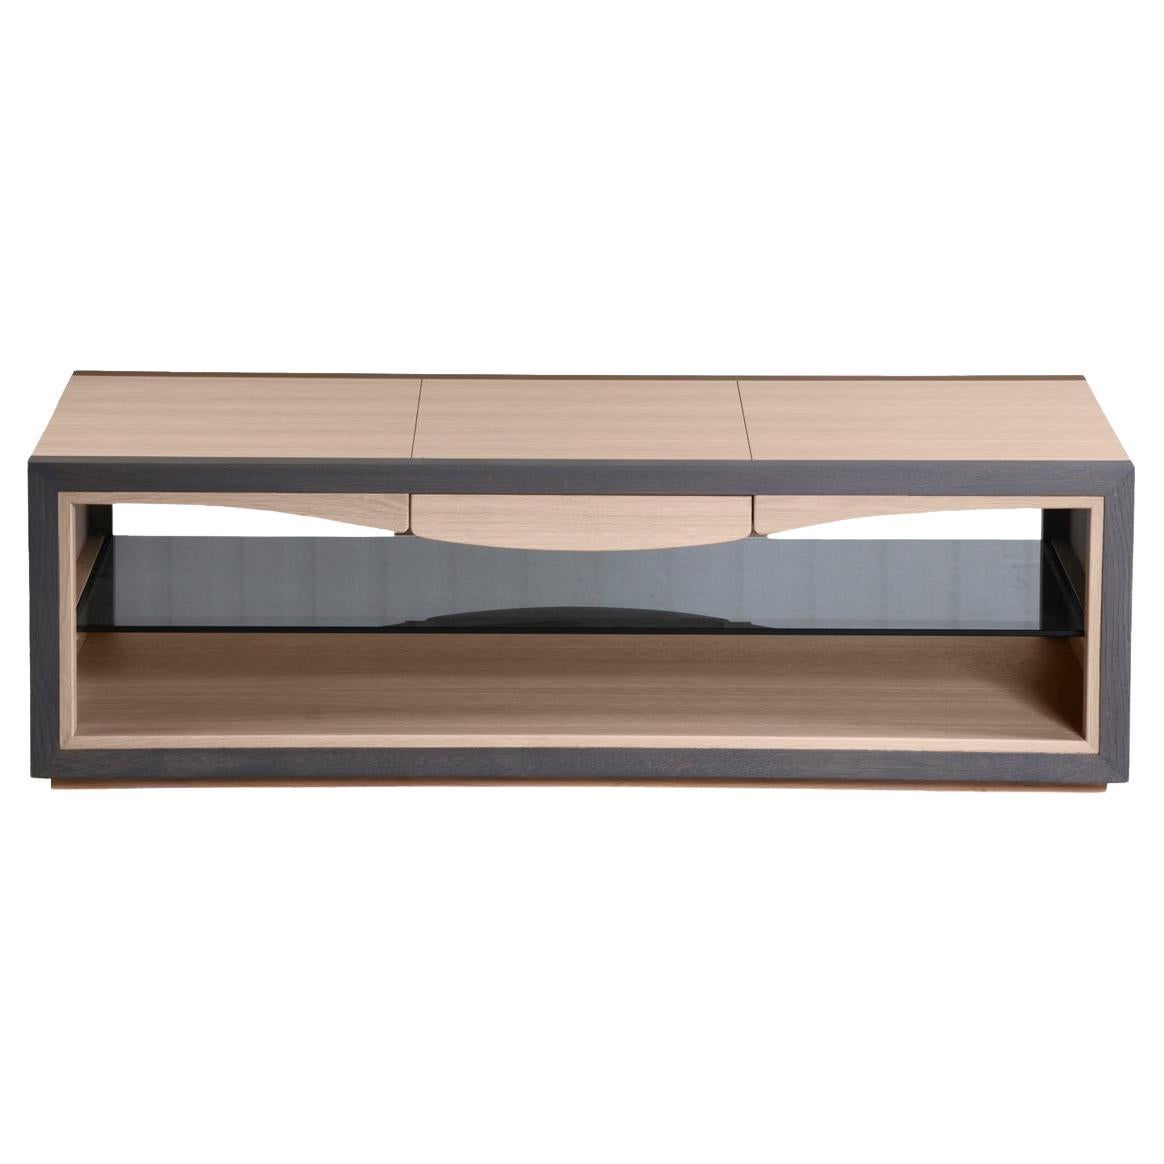 1-drawer French coffee table in oak, design by Christophe Lecomte 